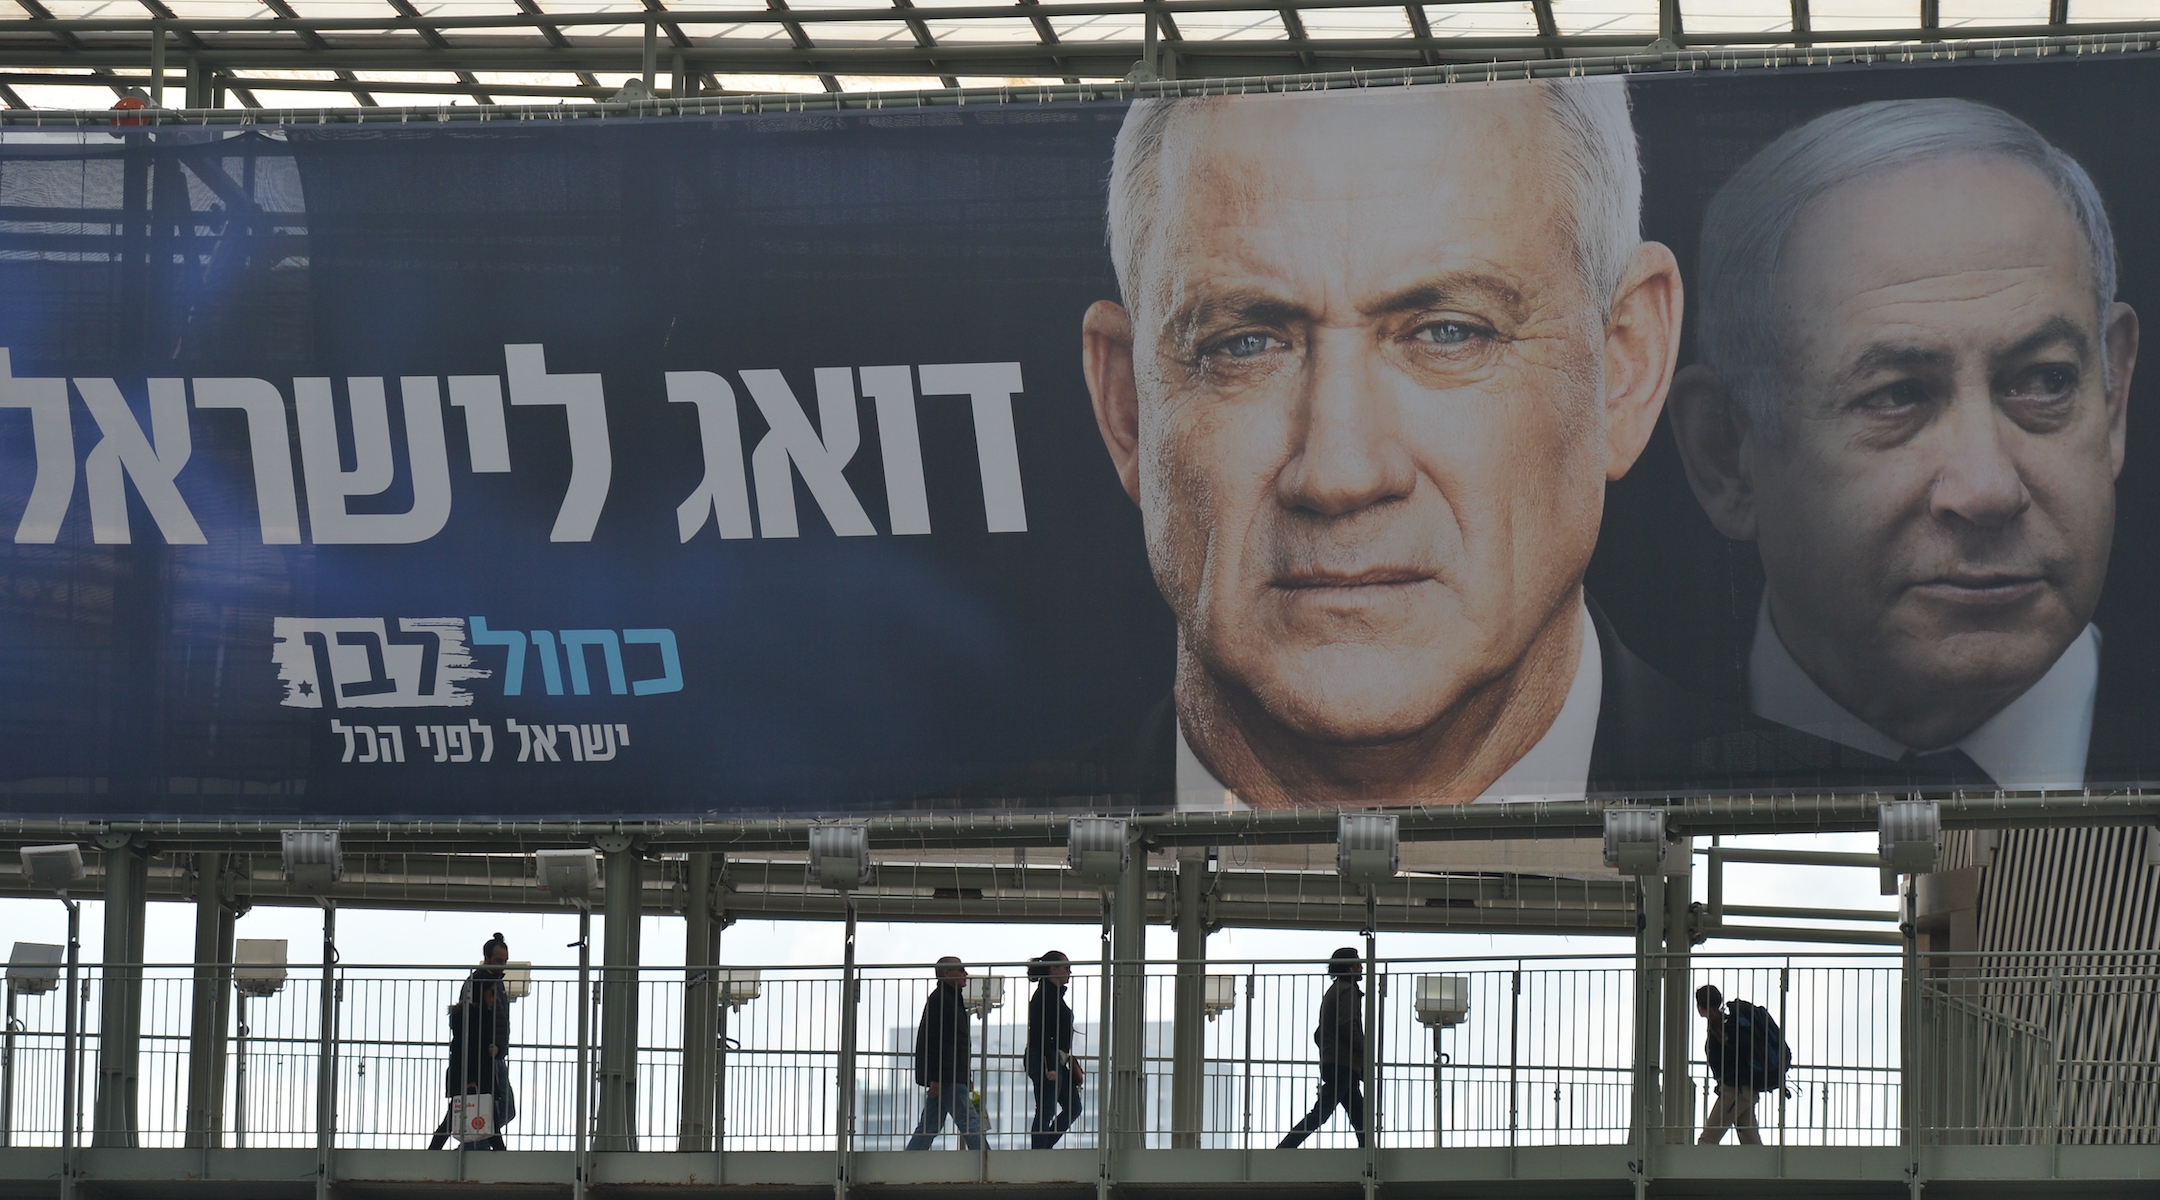 A campaign billboard in Ramat Gan, a suburb of Tel Aviv, featuring Blue and White party leader Benny Gantz in front of Israeli Prime Minister Benjamin Netanyahu. (Artur Widak/Getty Images)